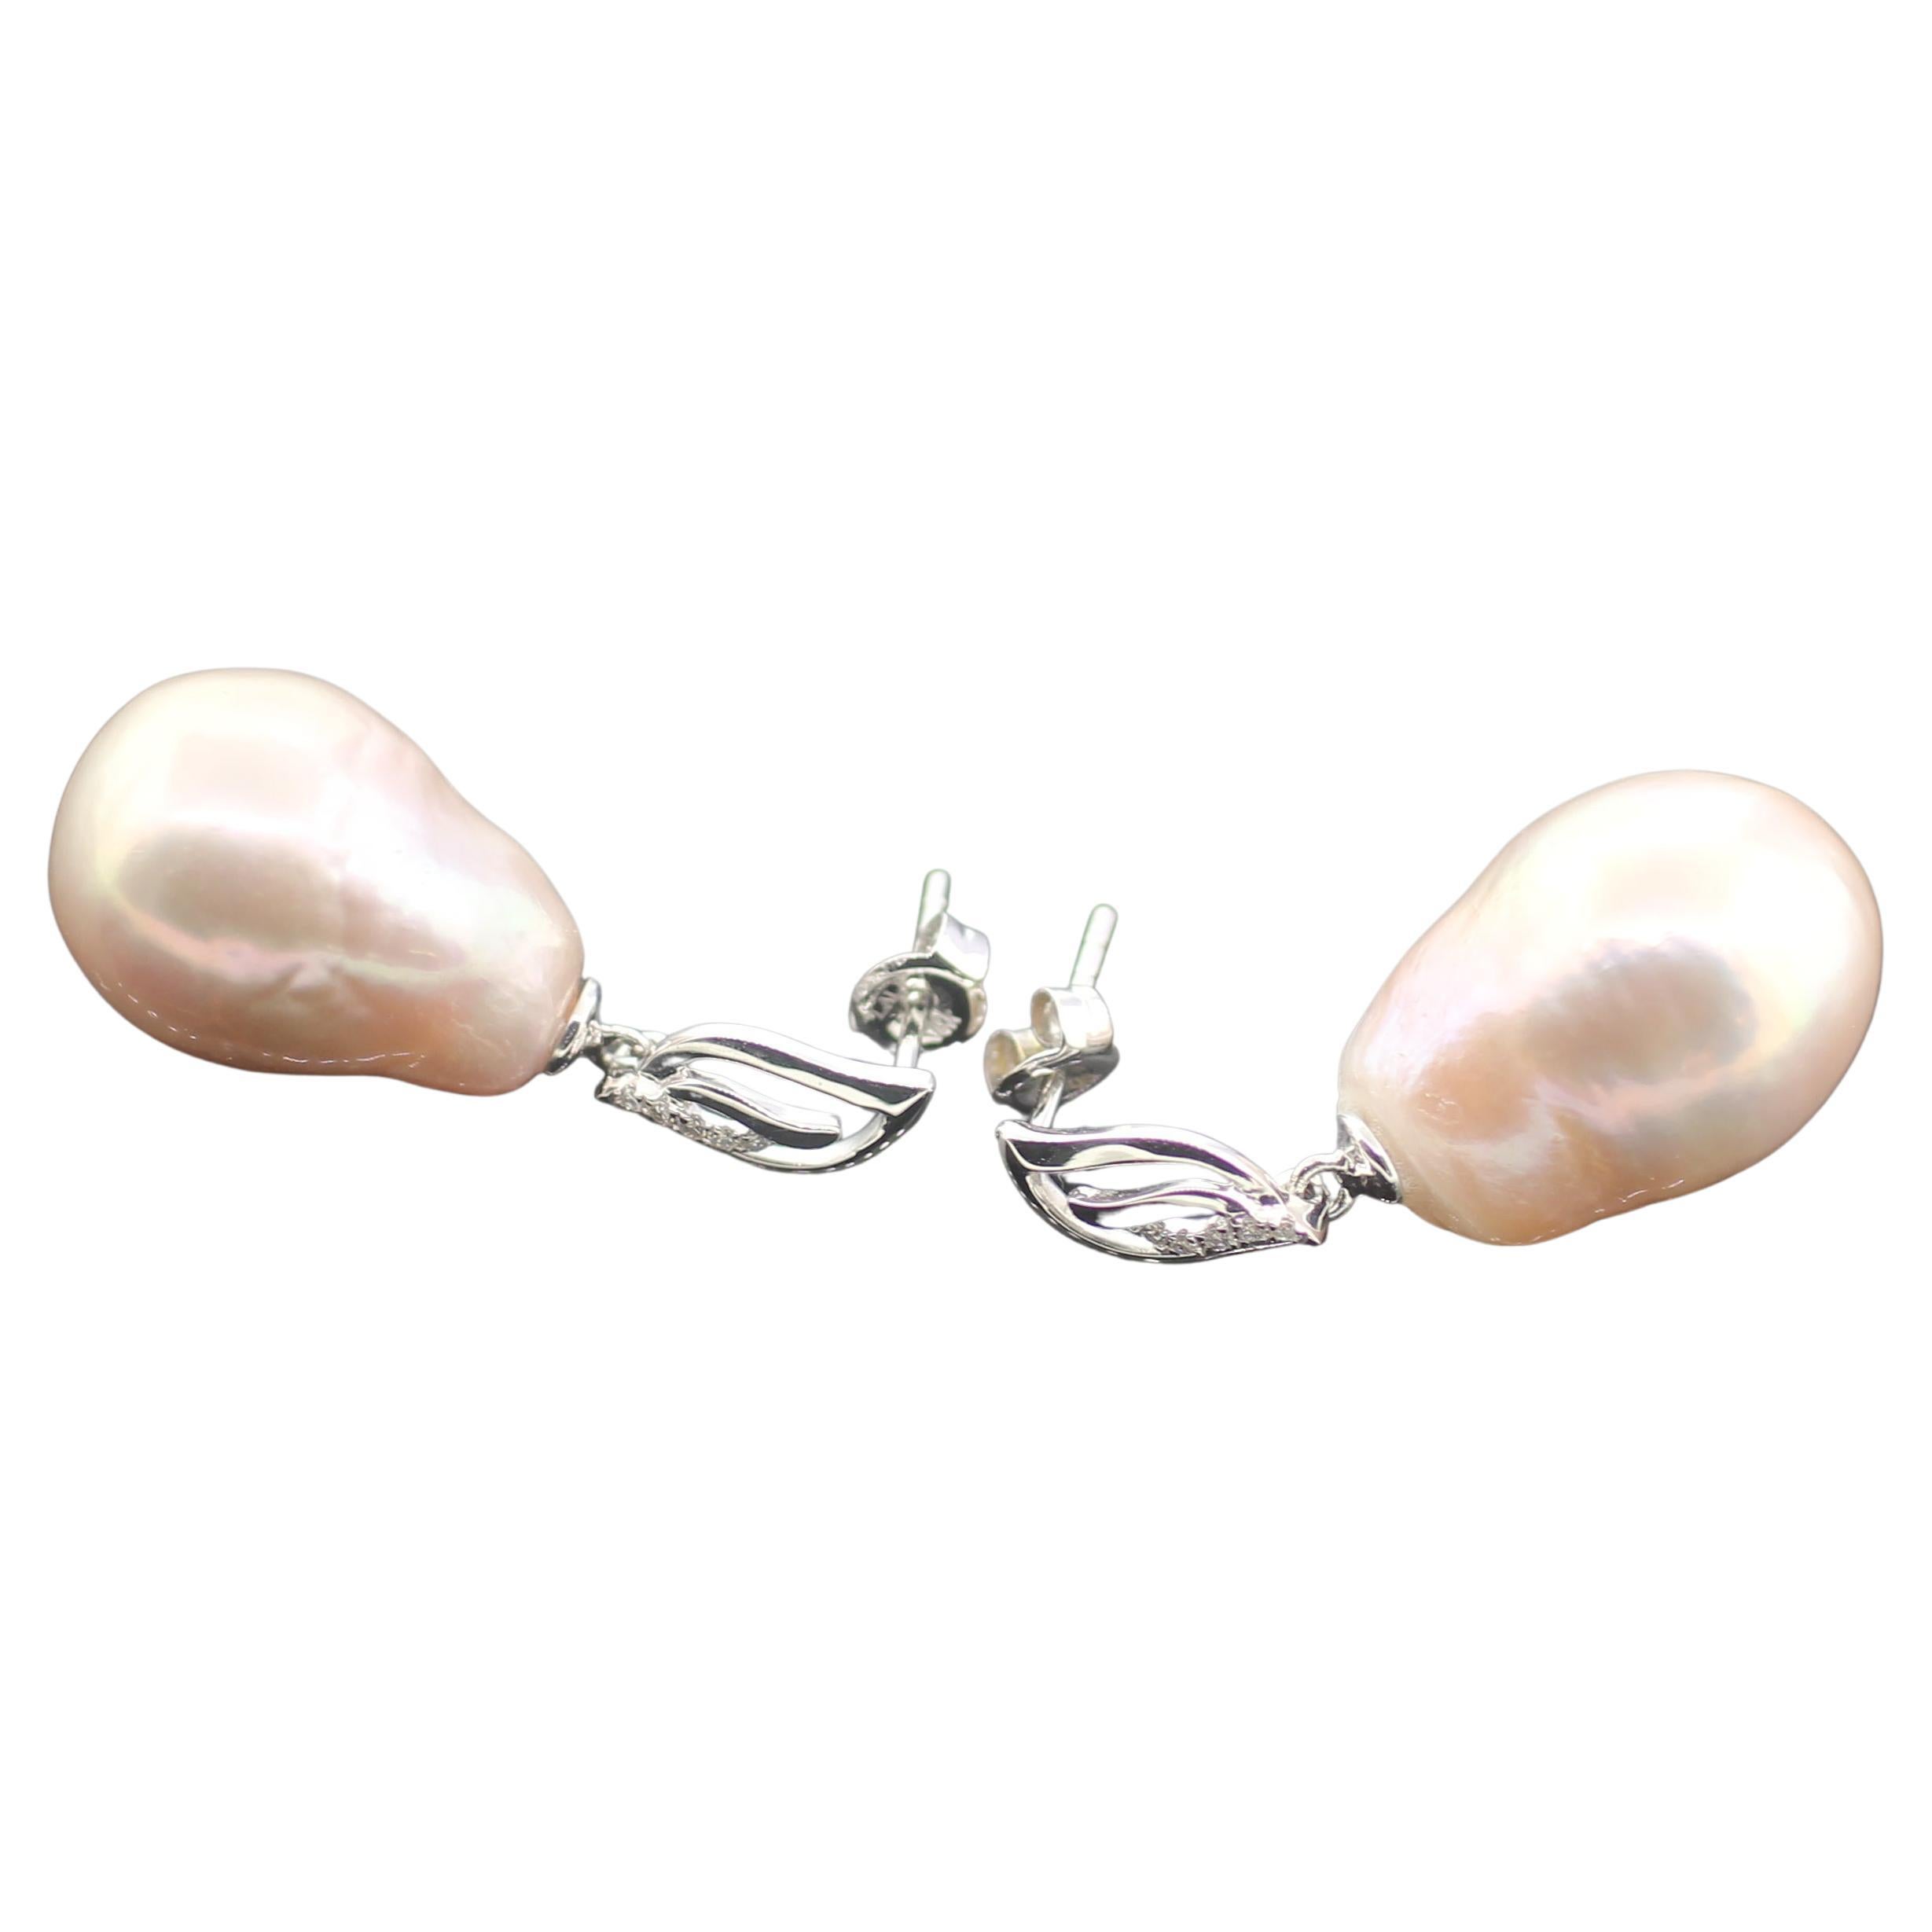 Hakimoto By Jewel Of Ocean
18K White Gold And Diamonds
Total item weight 7.4 grams
12 mm Cultured Baroque Cultured Pearls
18K White Gold High Polish
Orient: Very Good
Luster: Very Good
Nacre: Very Good
Manufacture Suggested Retail Price $2,500